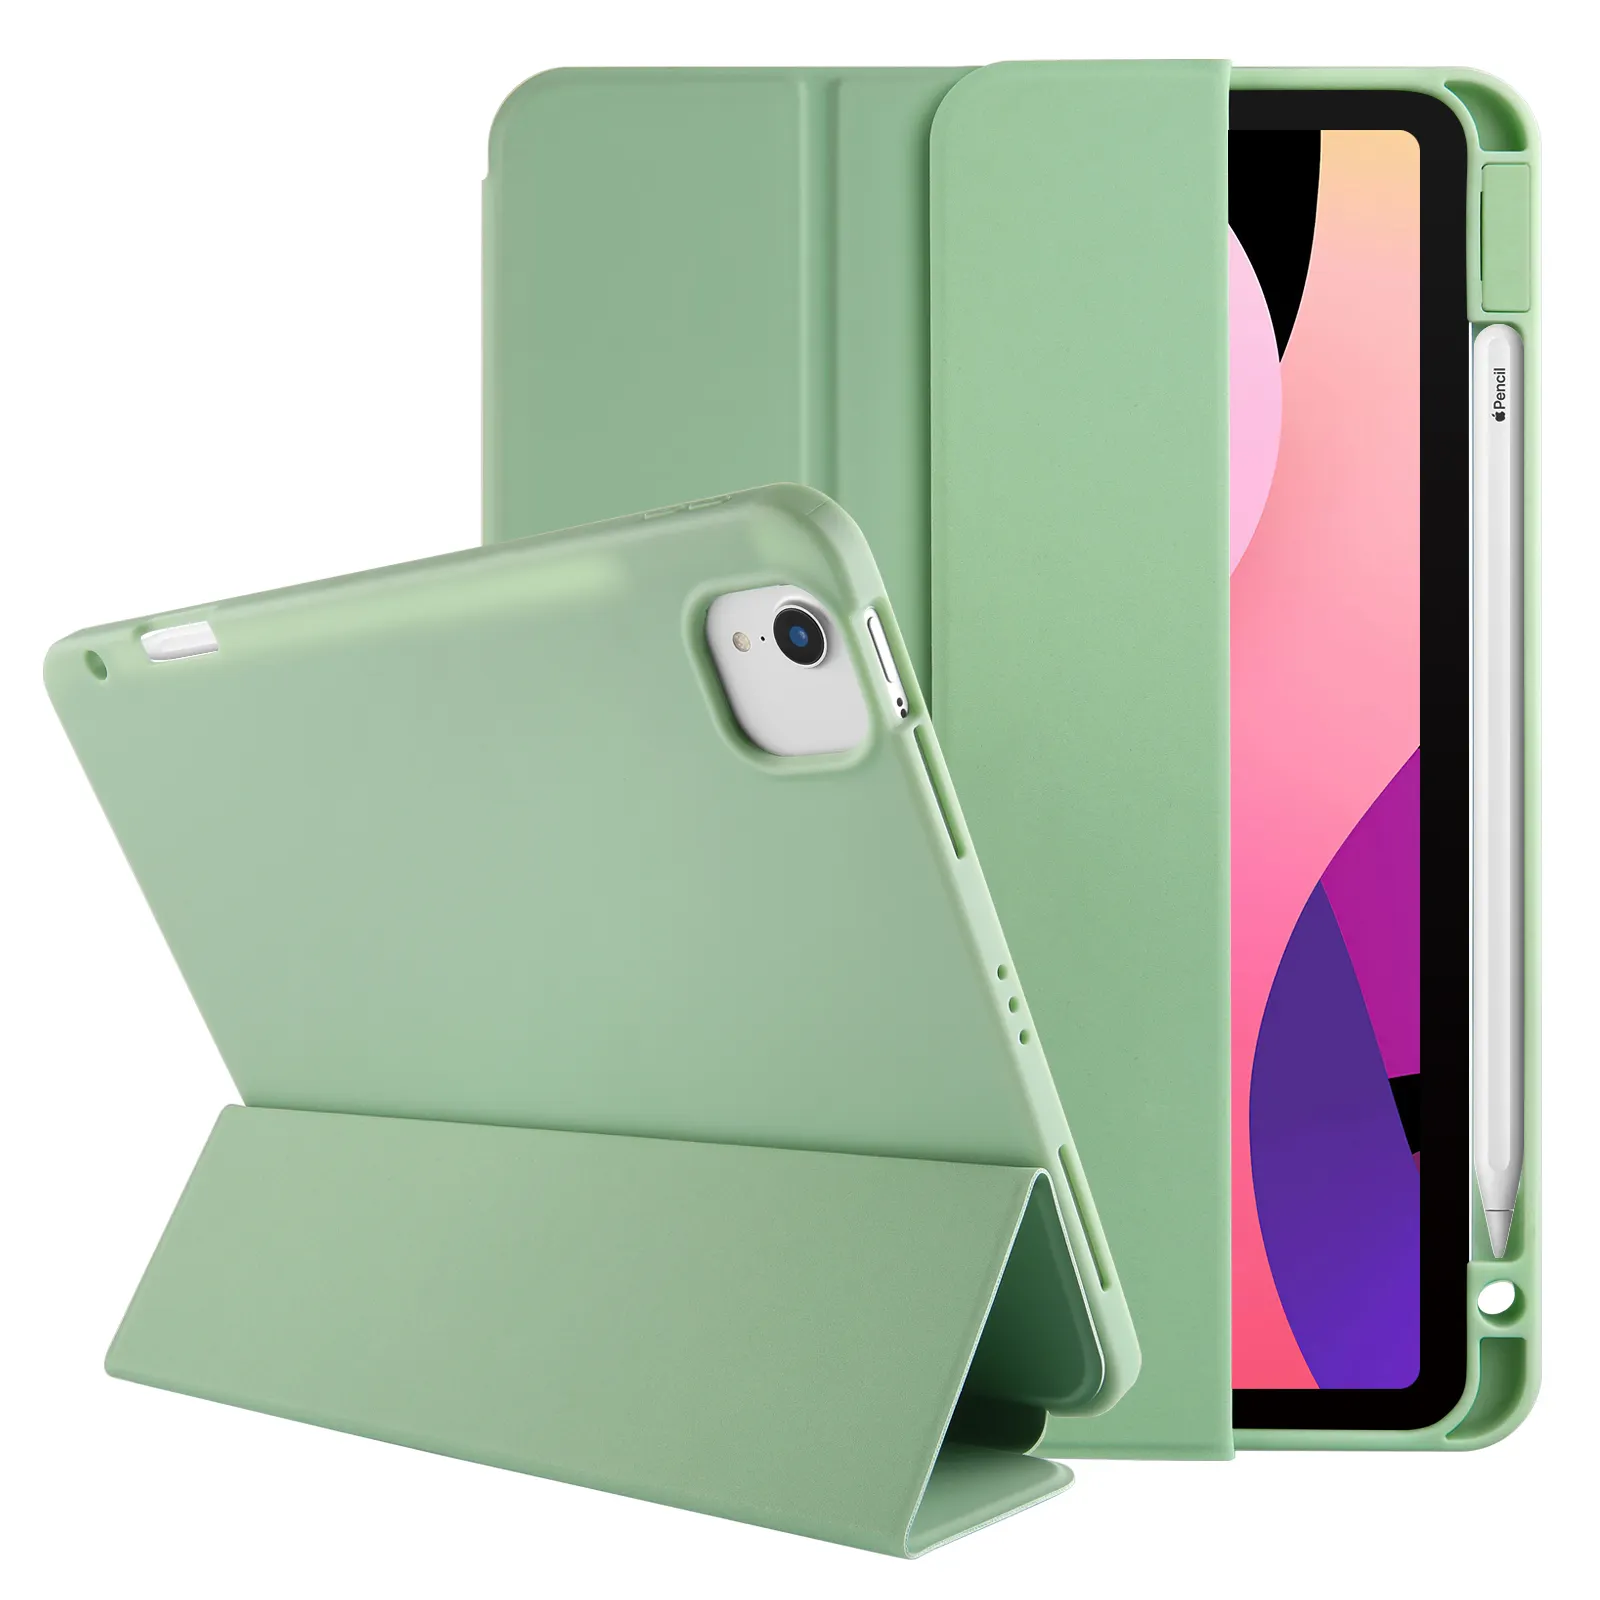 Protective Shockproof Case Soft TPU Cover With Pencil Holder for iPad Air 4 case 10.9 Inch 2020 iPad Pro 11 2018